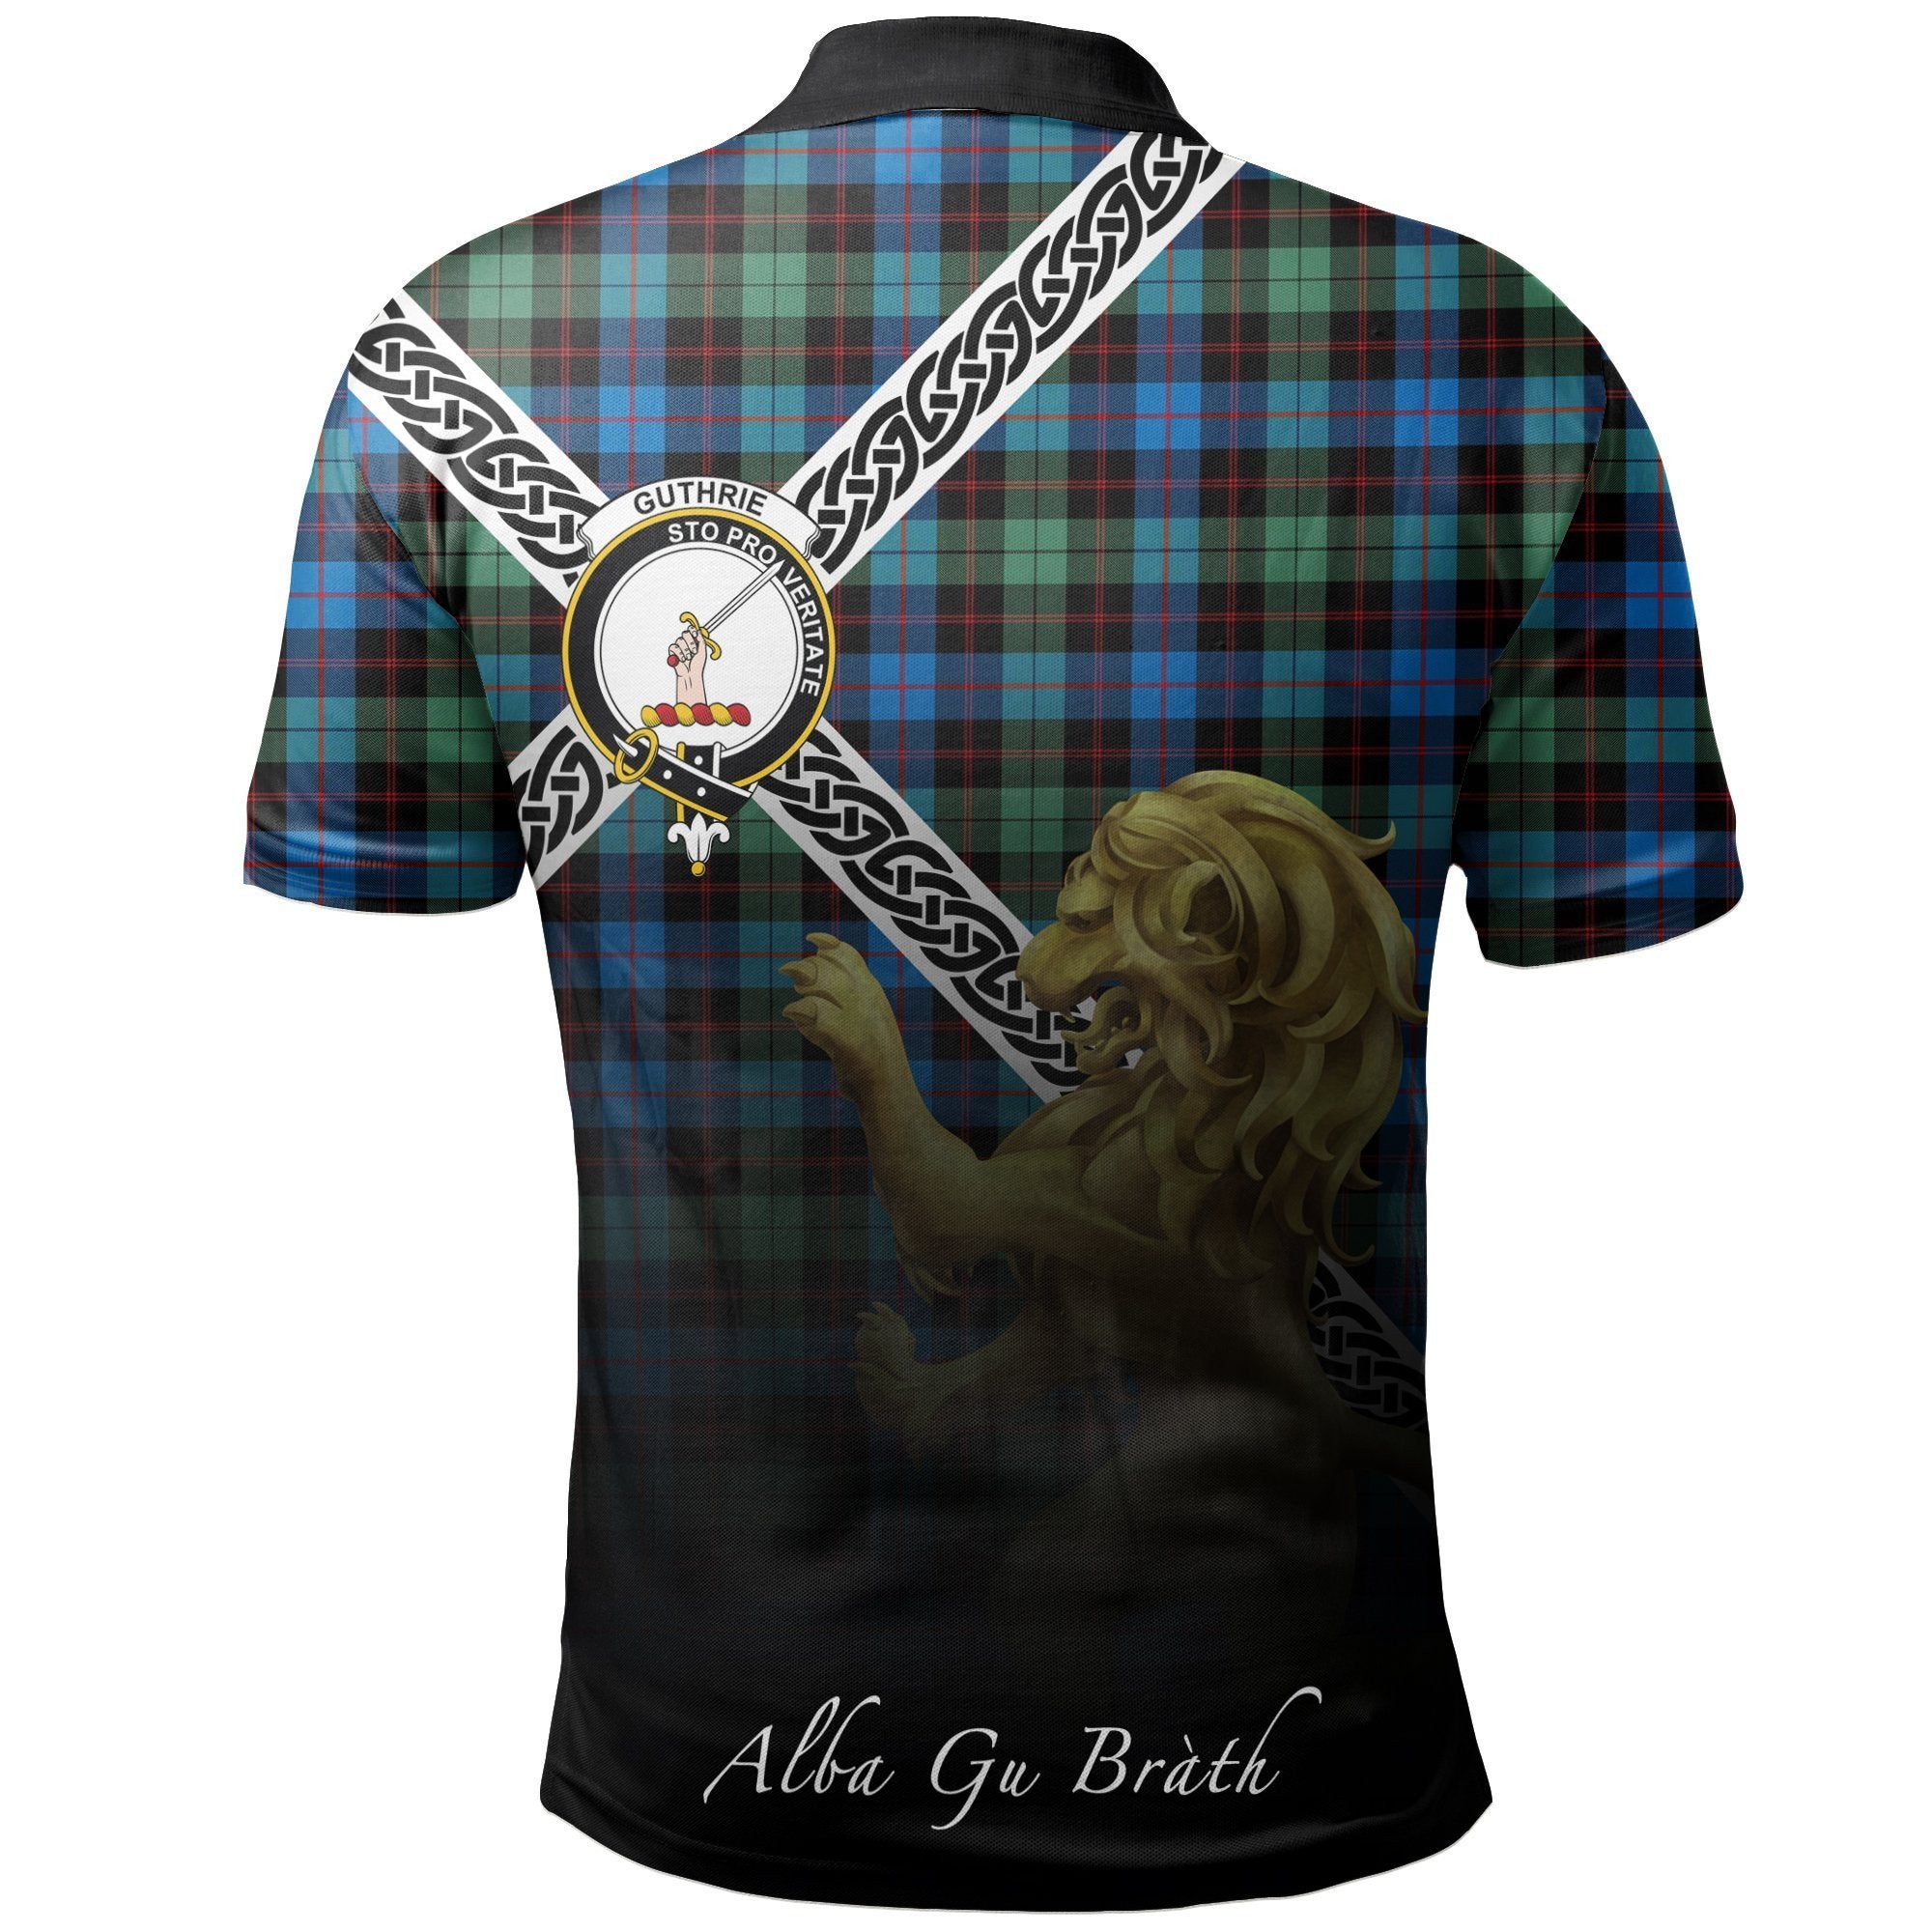 Guthrie Ancient Clan Polo Shirt, Scottish Tartan Guthrie Ancient Clans Polo Shirt Celtic Lion Style